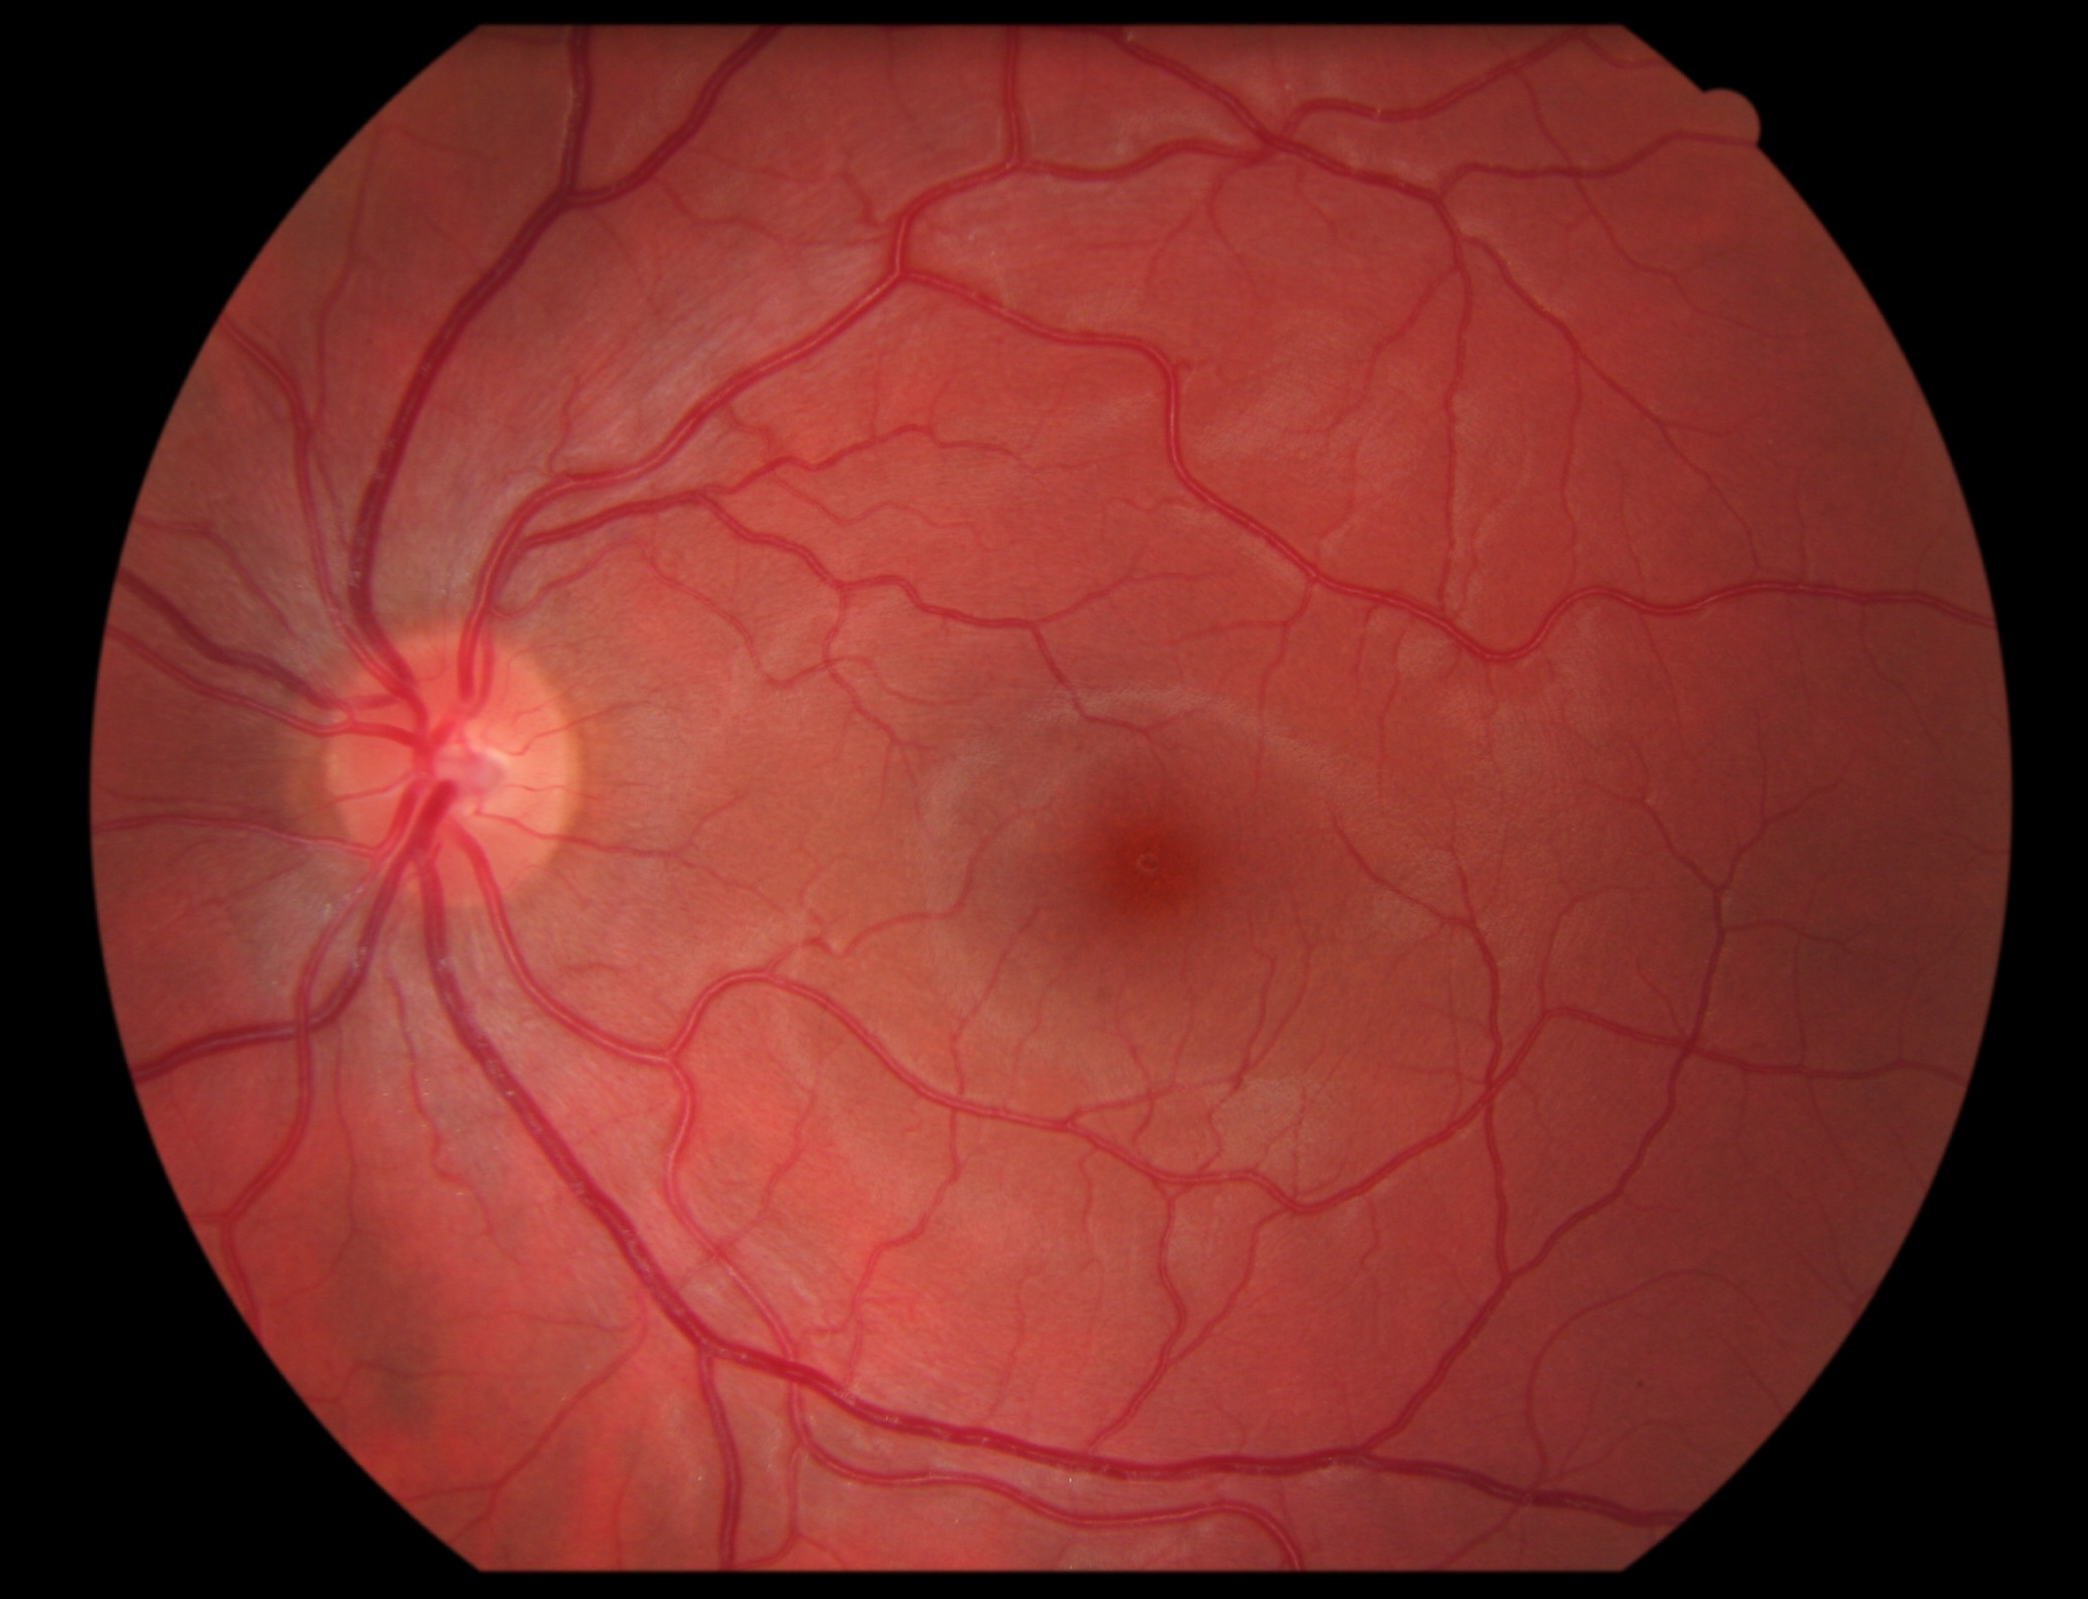 Retinal diseases - The American Society of Retina Specialists